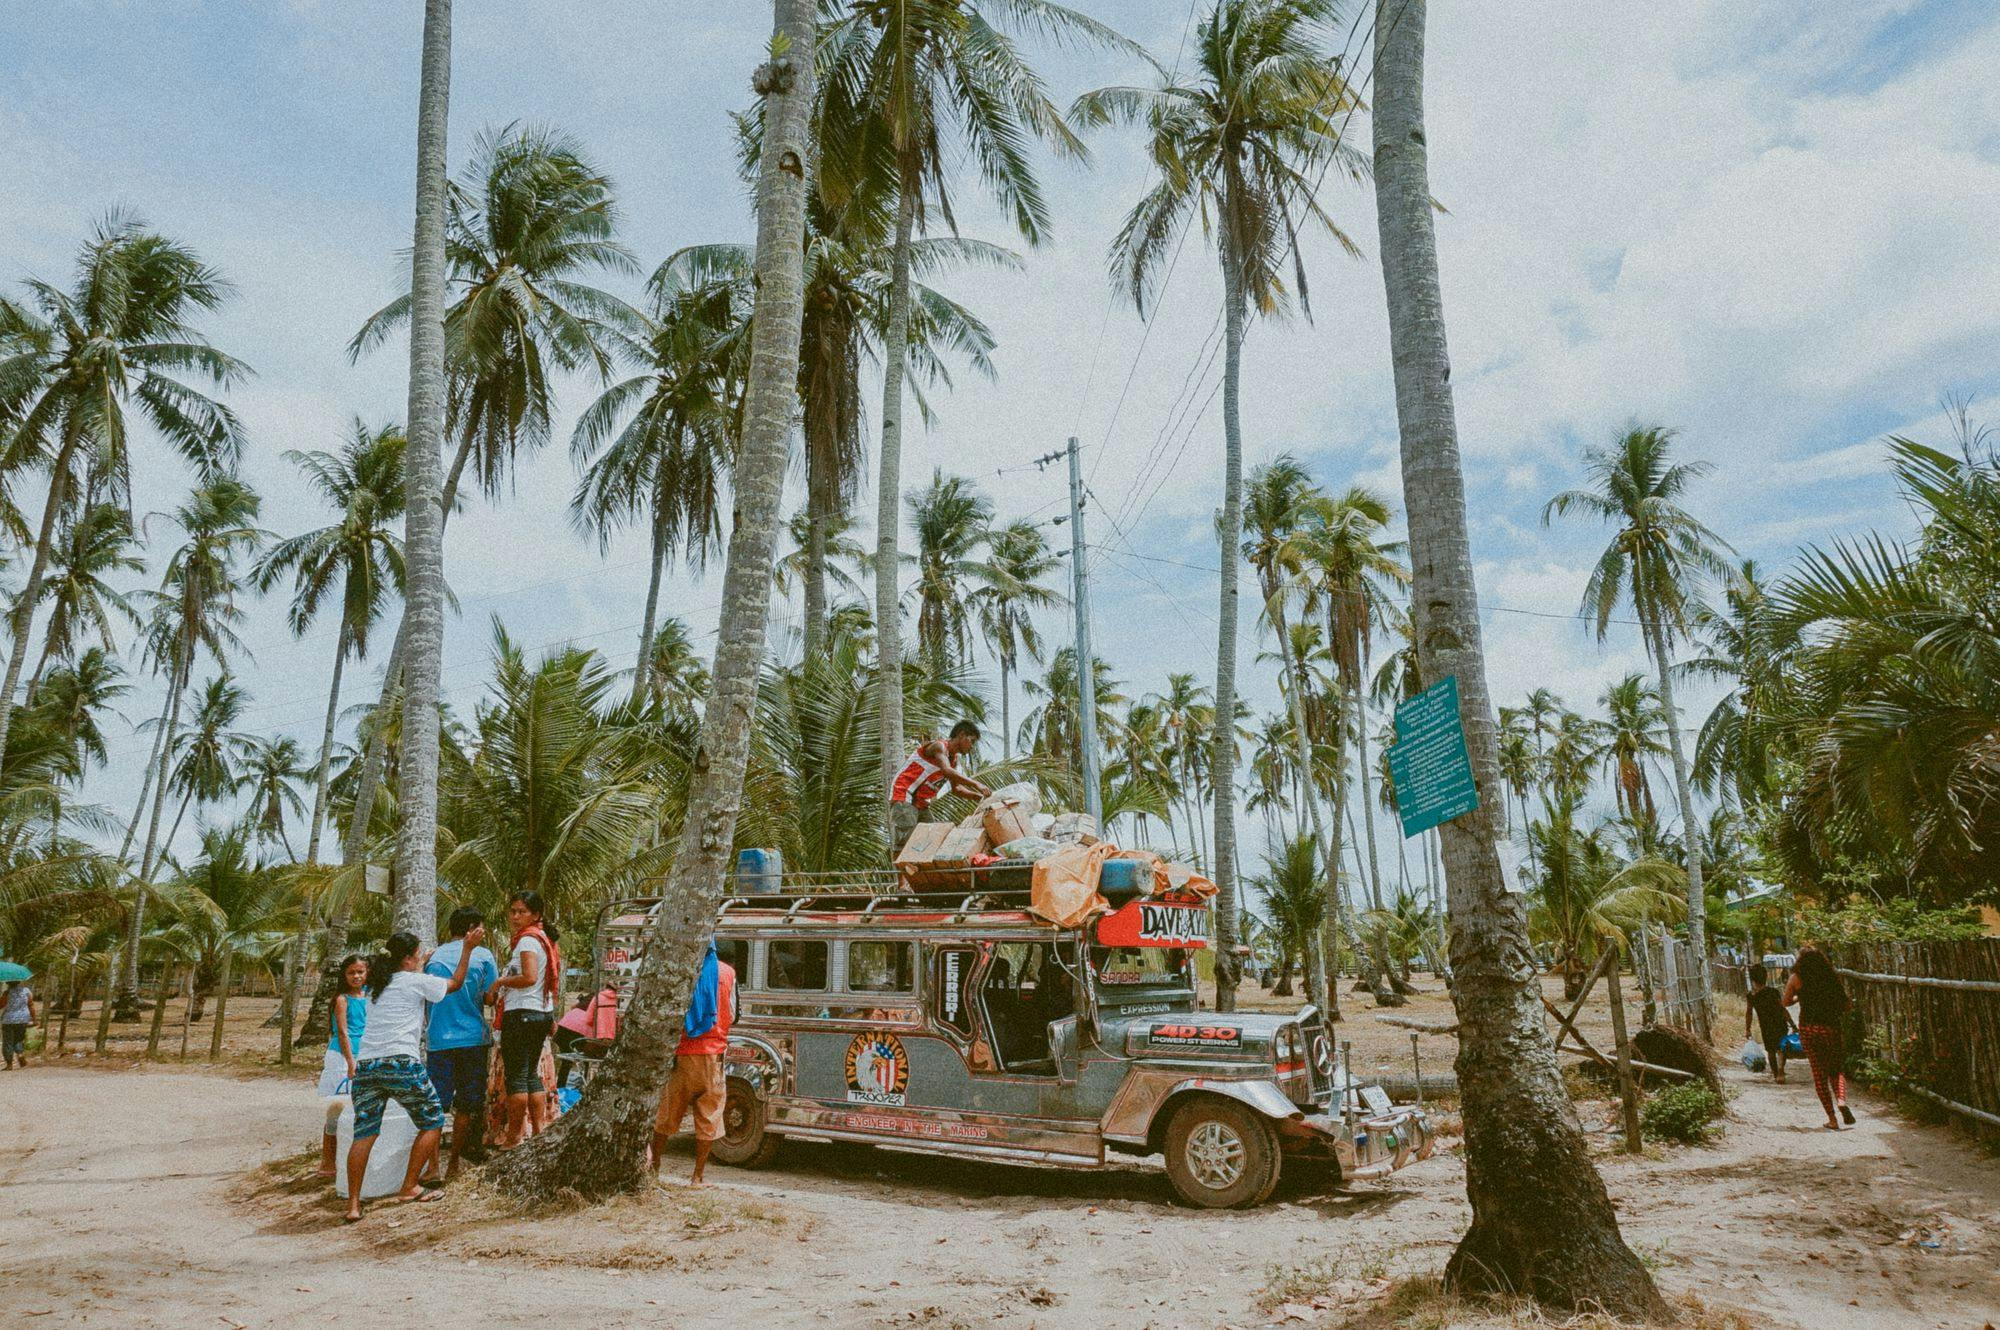 asian-travelling-campervan-palm-trees-people-standing-around